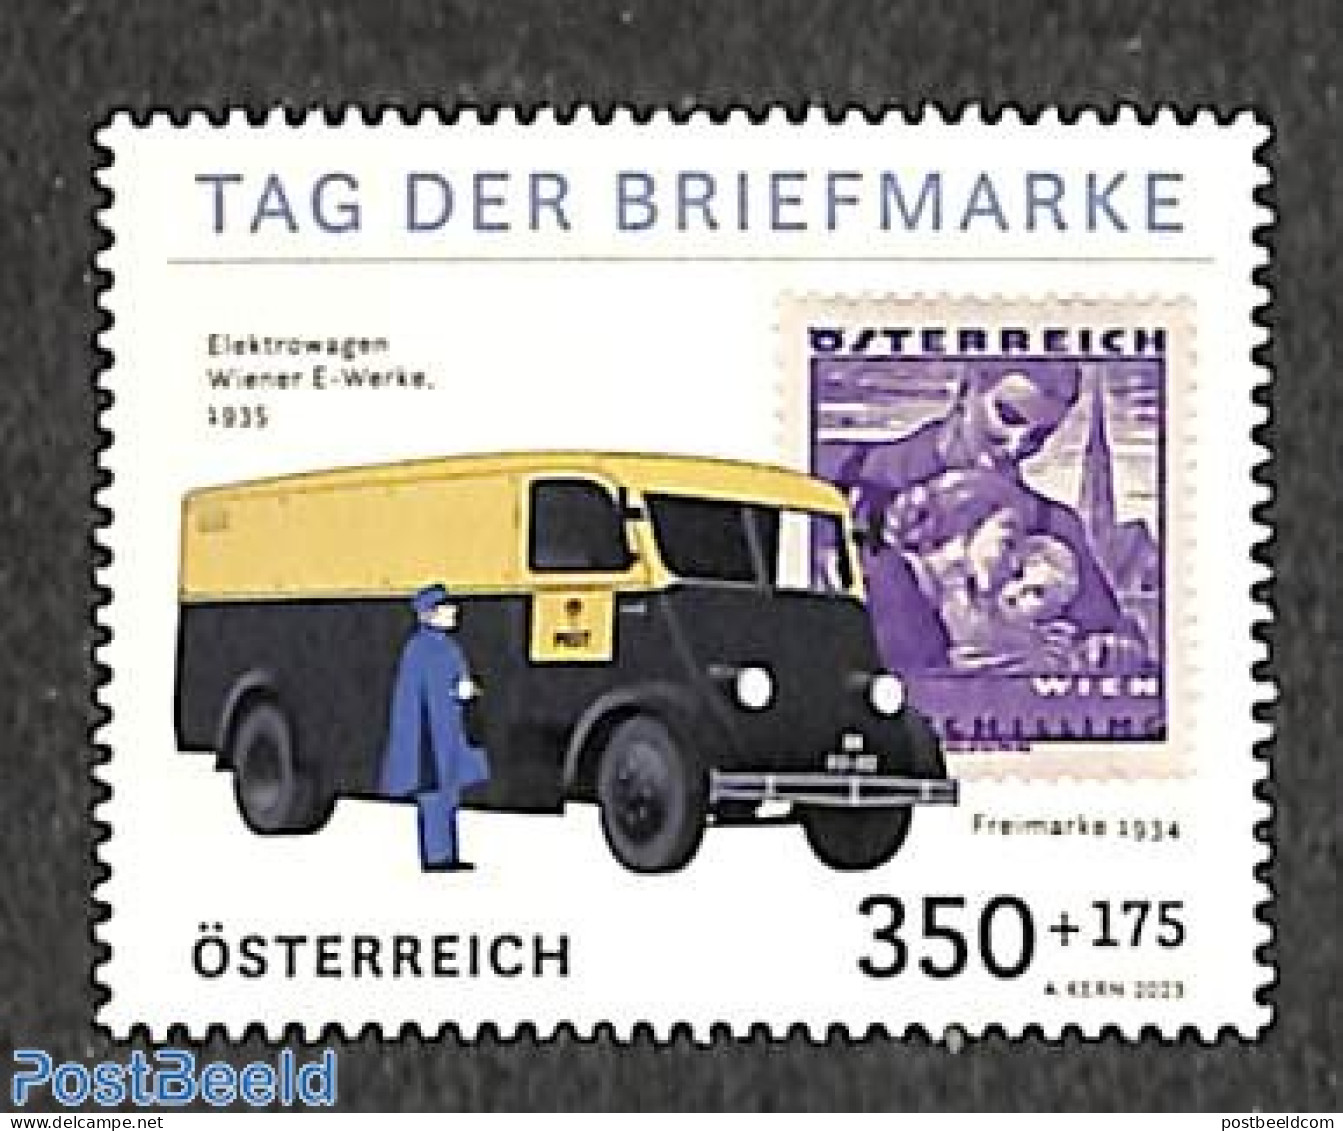 Austria 2023 Stamp Day 1v, Mint NH, Transport - Post - Stamp Day - Stamps On Stamps - Automobiles - Neufs